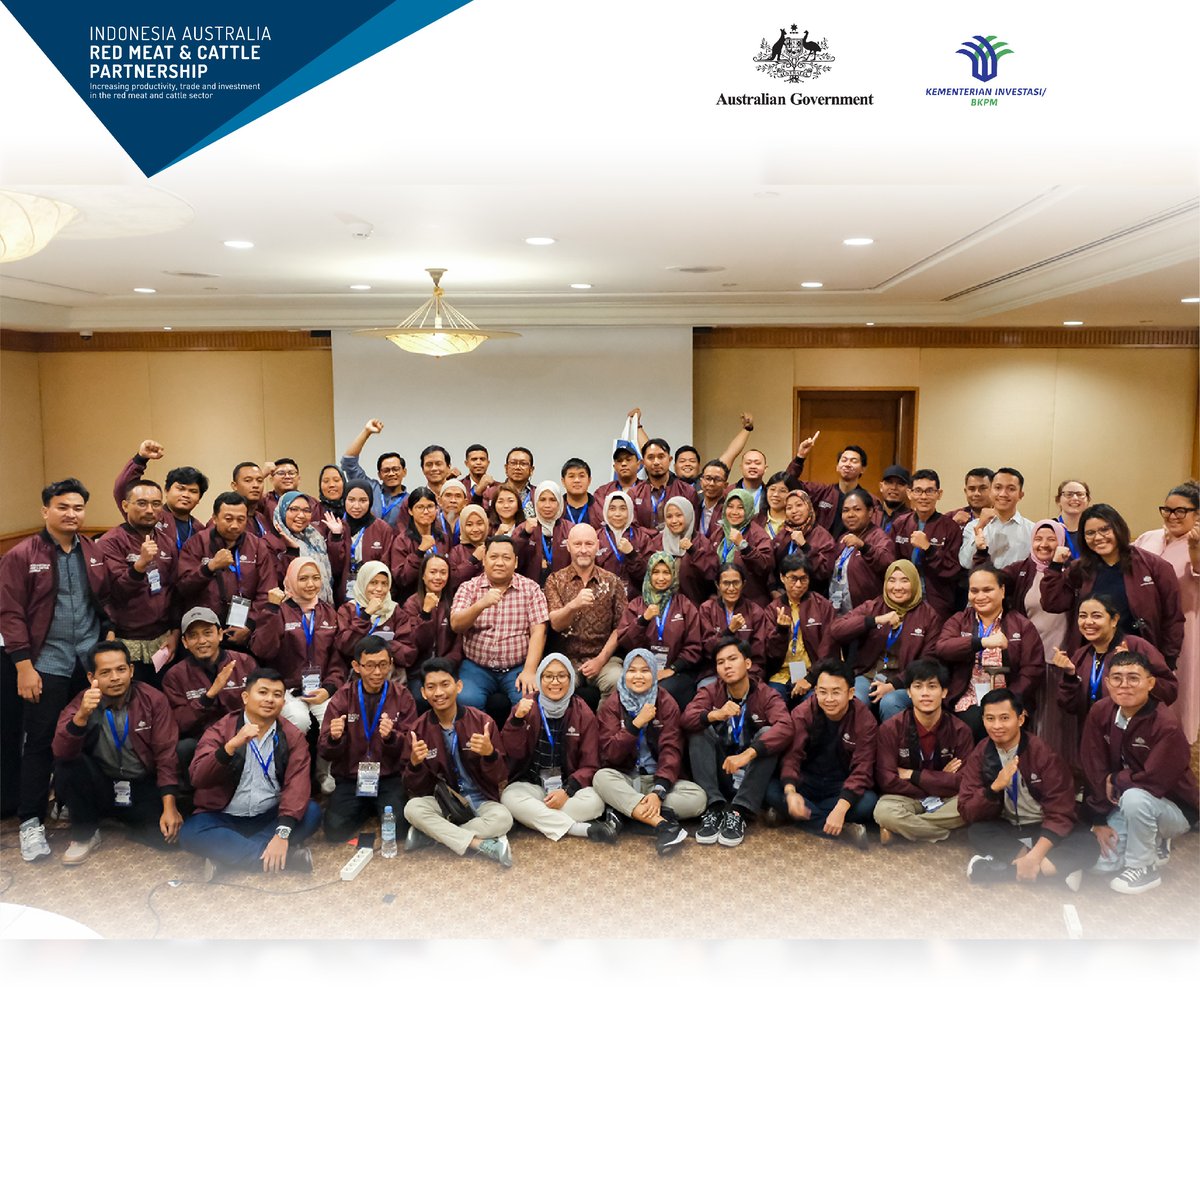 The Partnership hopes that the event can advance the red meat and cattle sectors in Indonesia.
----------
#InvestinMeat #RedMeatCattle #iaredmeatcattle #redmeatcattlepartnership #australiaindonesia #foodsecurity #agriculture #beefcattle #peternakansapi #dagingsapi #symposium